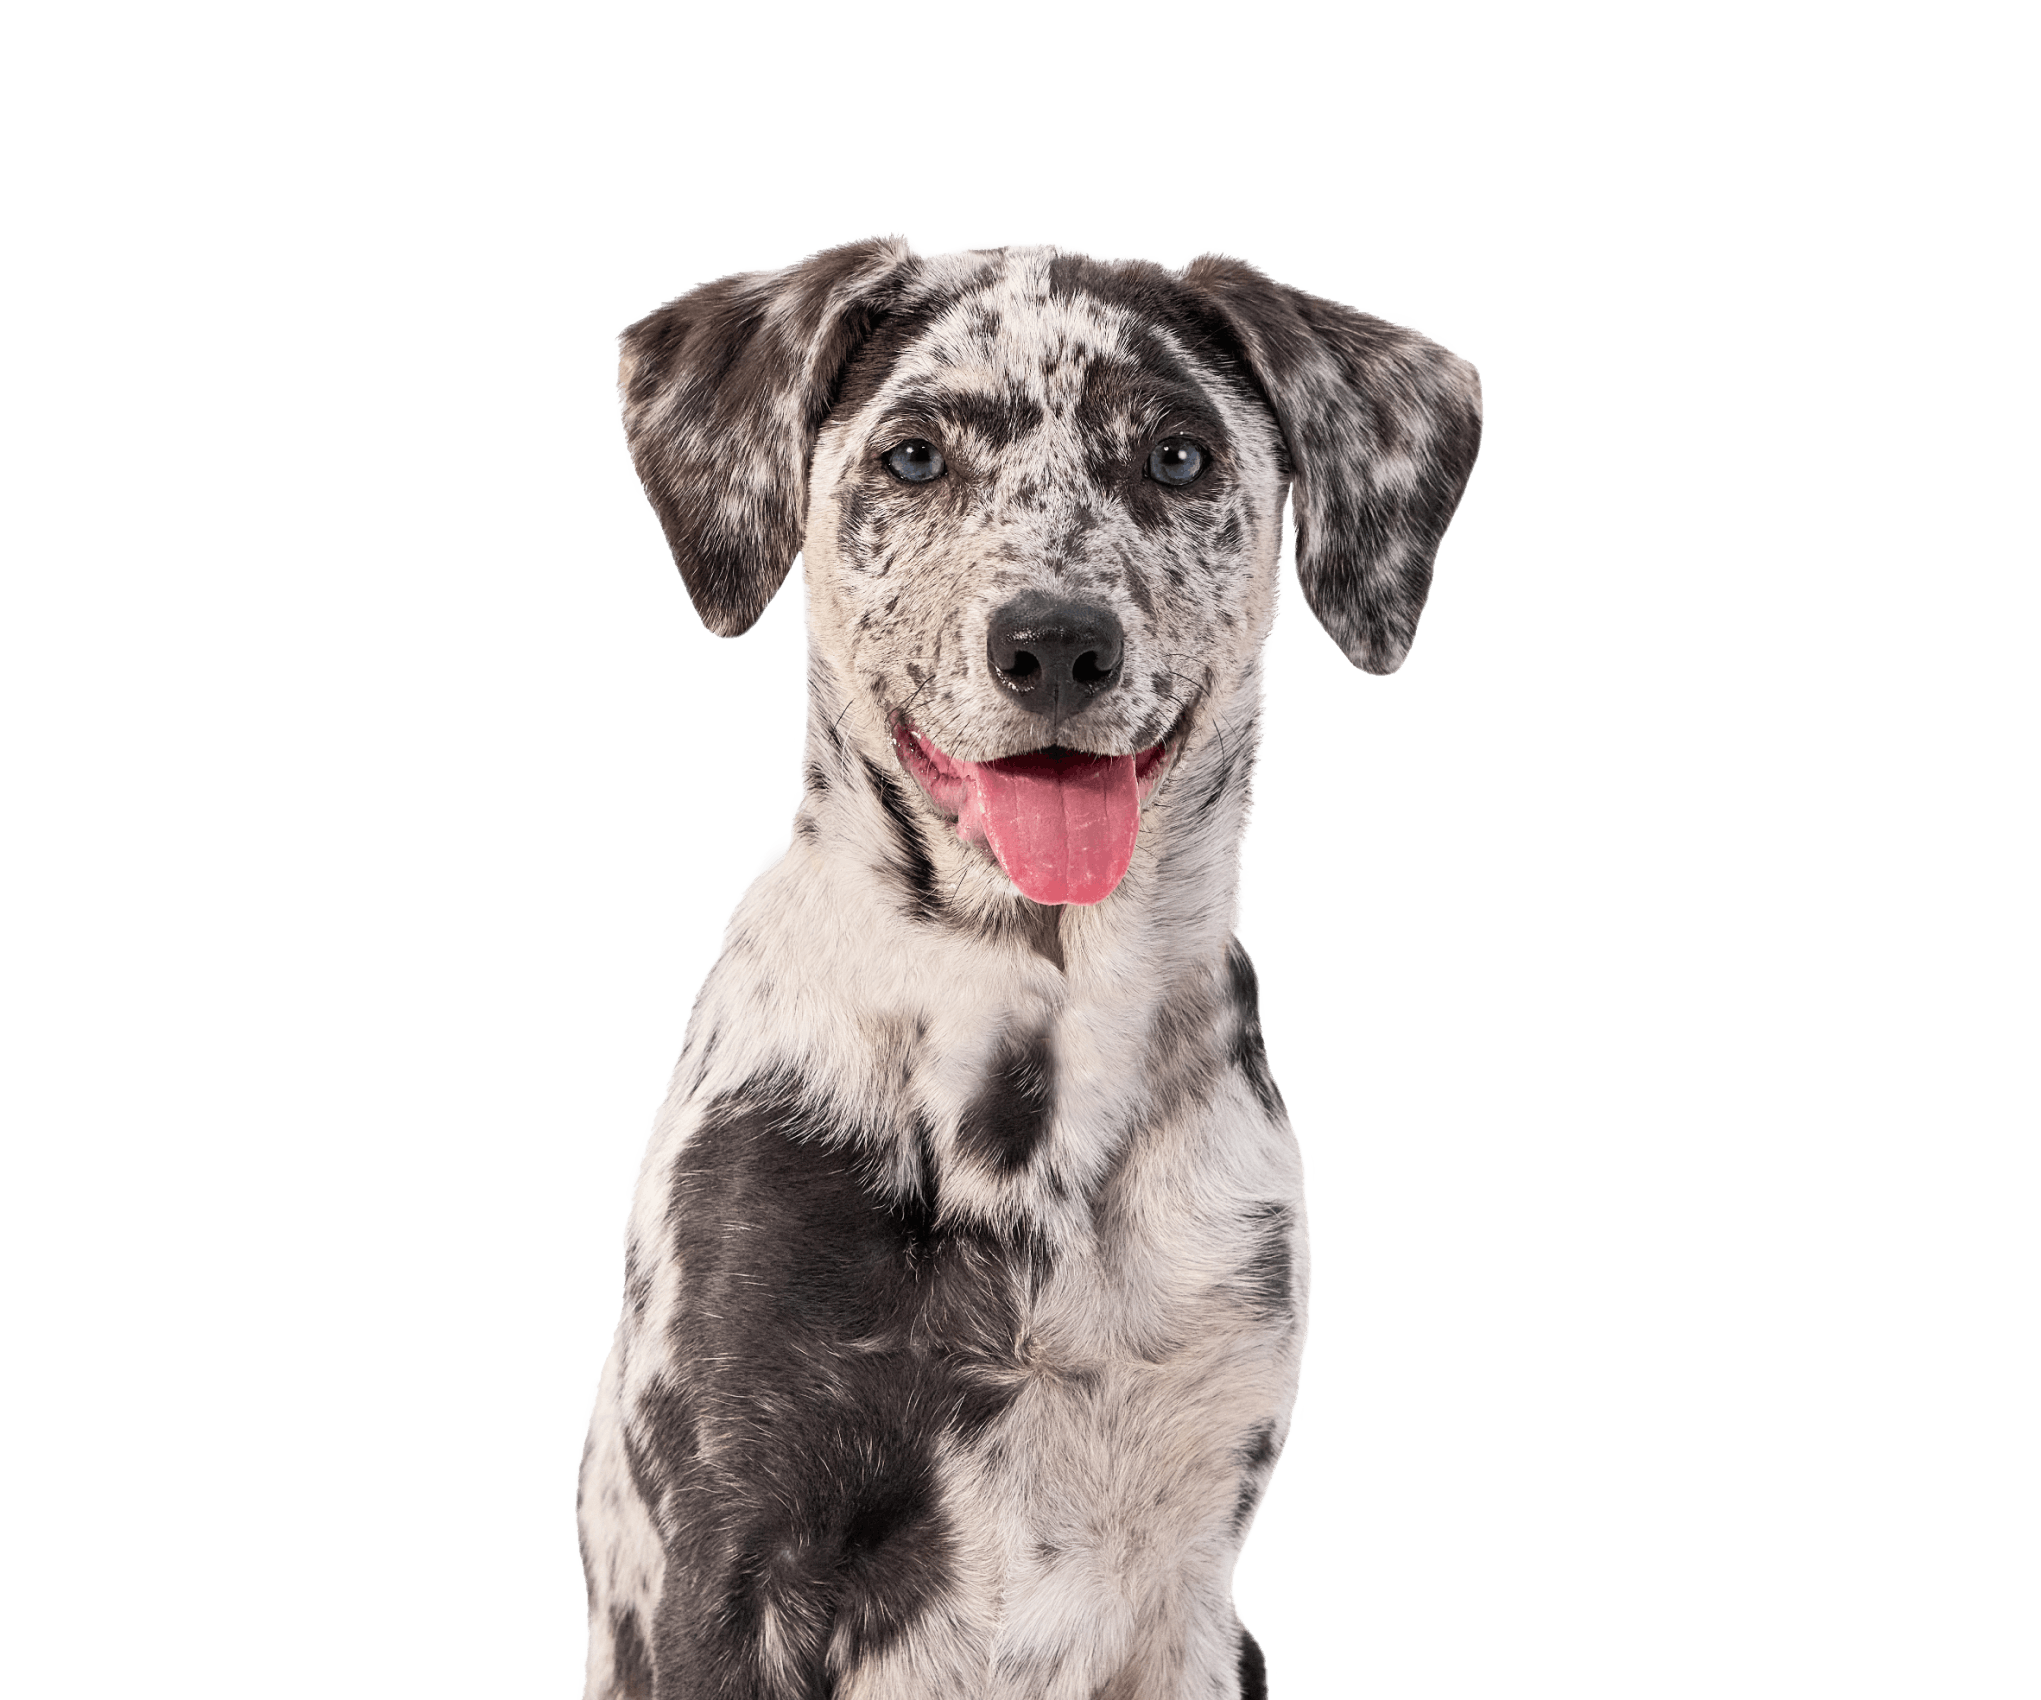 Very cute and happy black and white mixed breed dog with tongue out